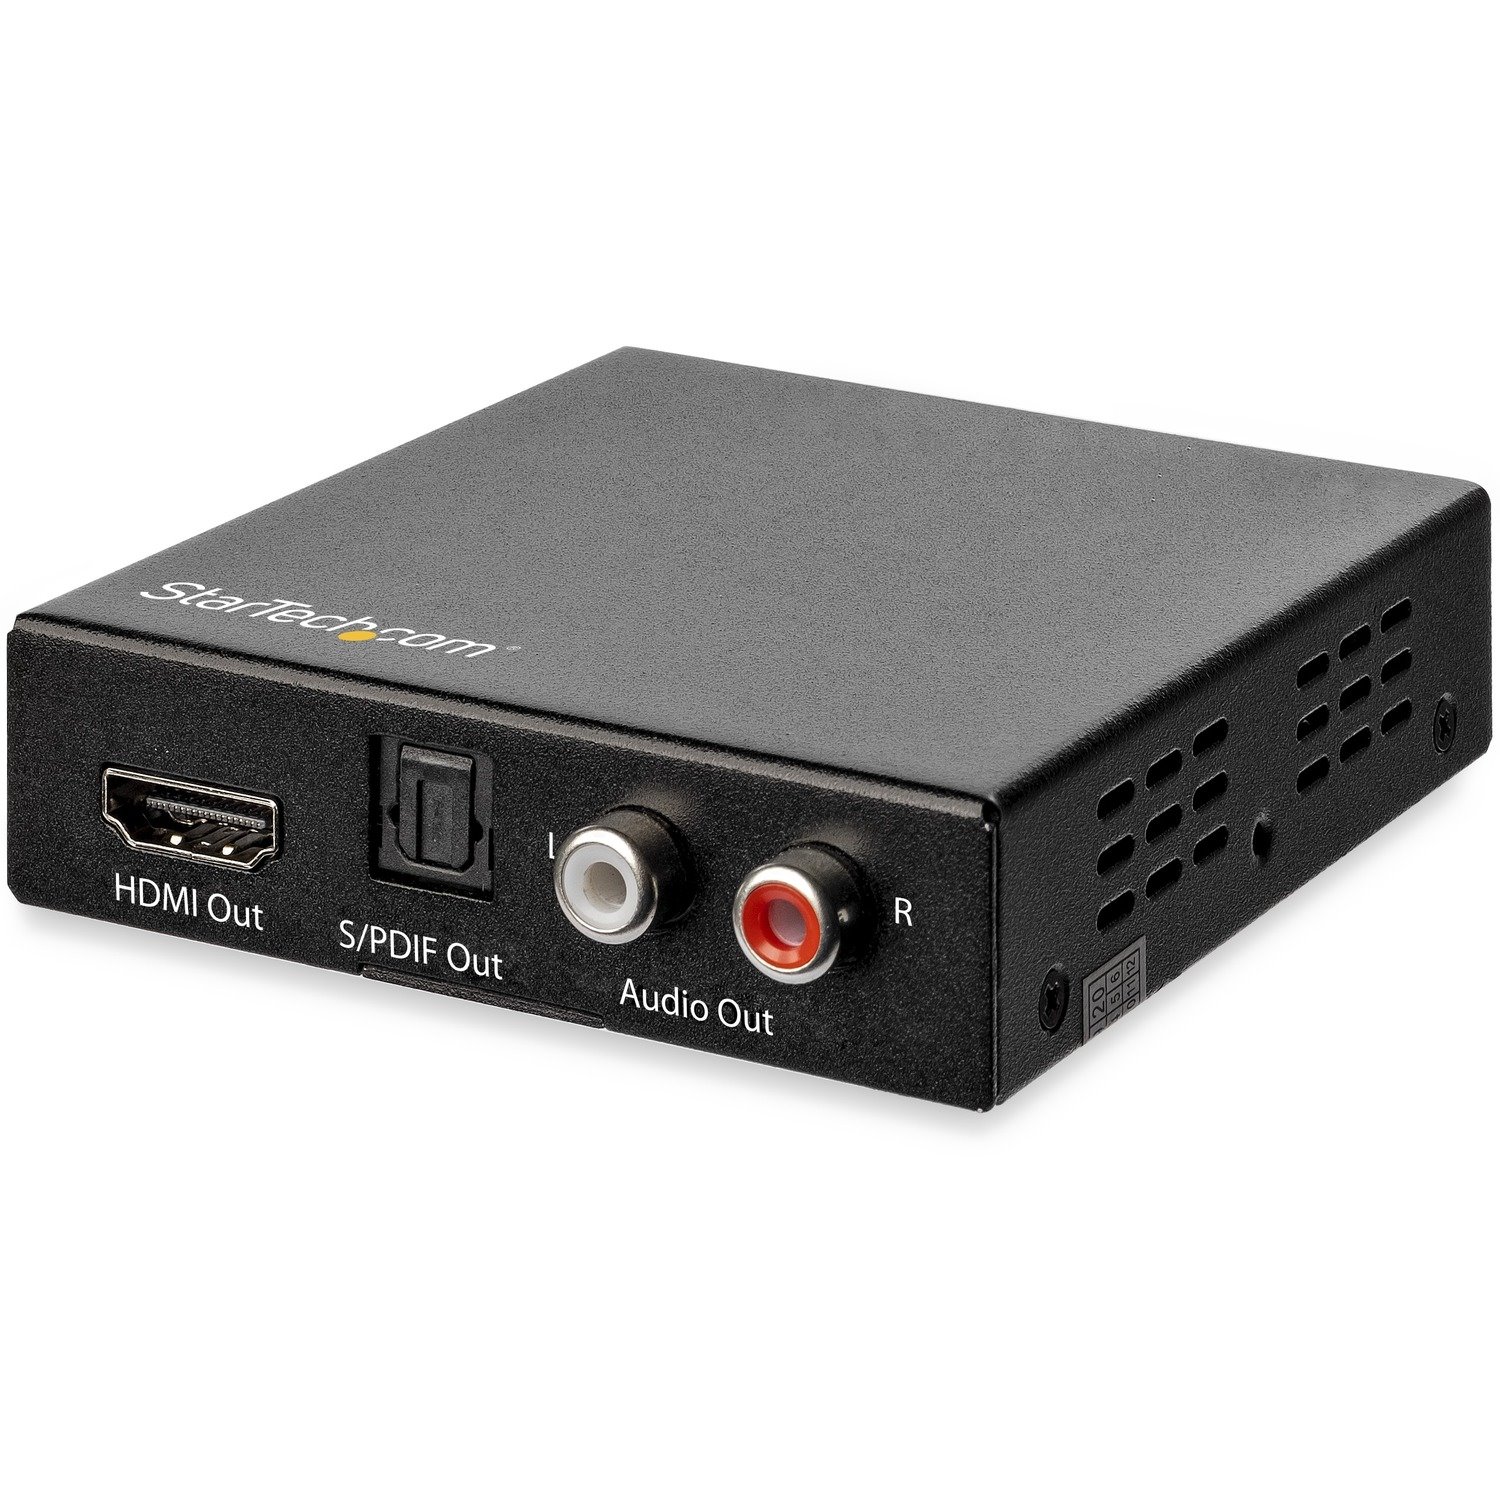 StarTech.com 4K HDMI Audio Extractor with 40K 60Hz Support - HDMI Audio De-embedder - HDR - Toslink Optical Audio - Dual RCA Audio - HDMI Audio - Supports the latest HDMI 2.0 specifications and HDR video pass-through and high video bandwidth up to 18Gbps - Integrated EDID management capabilities